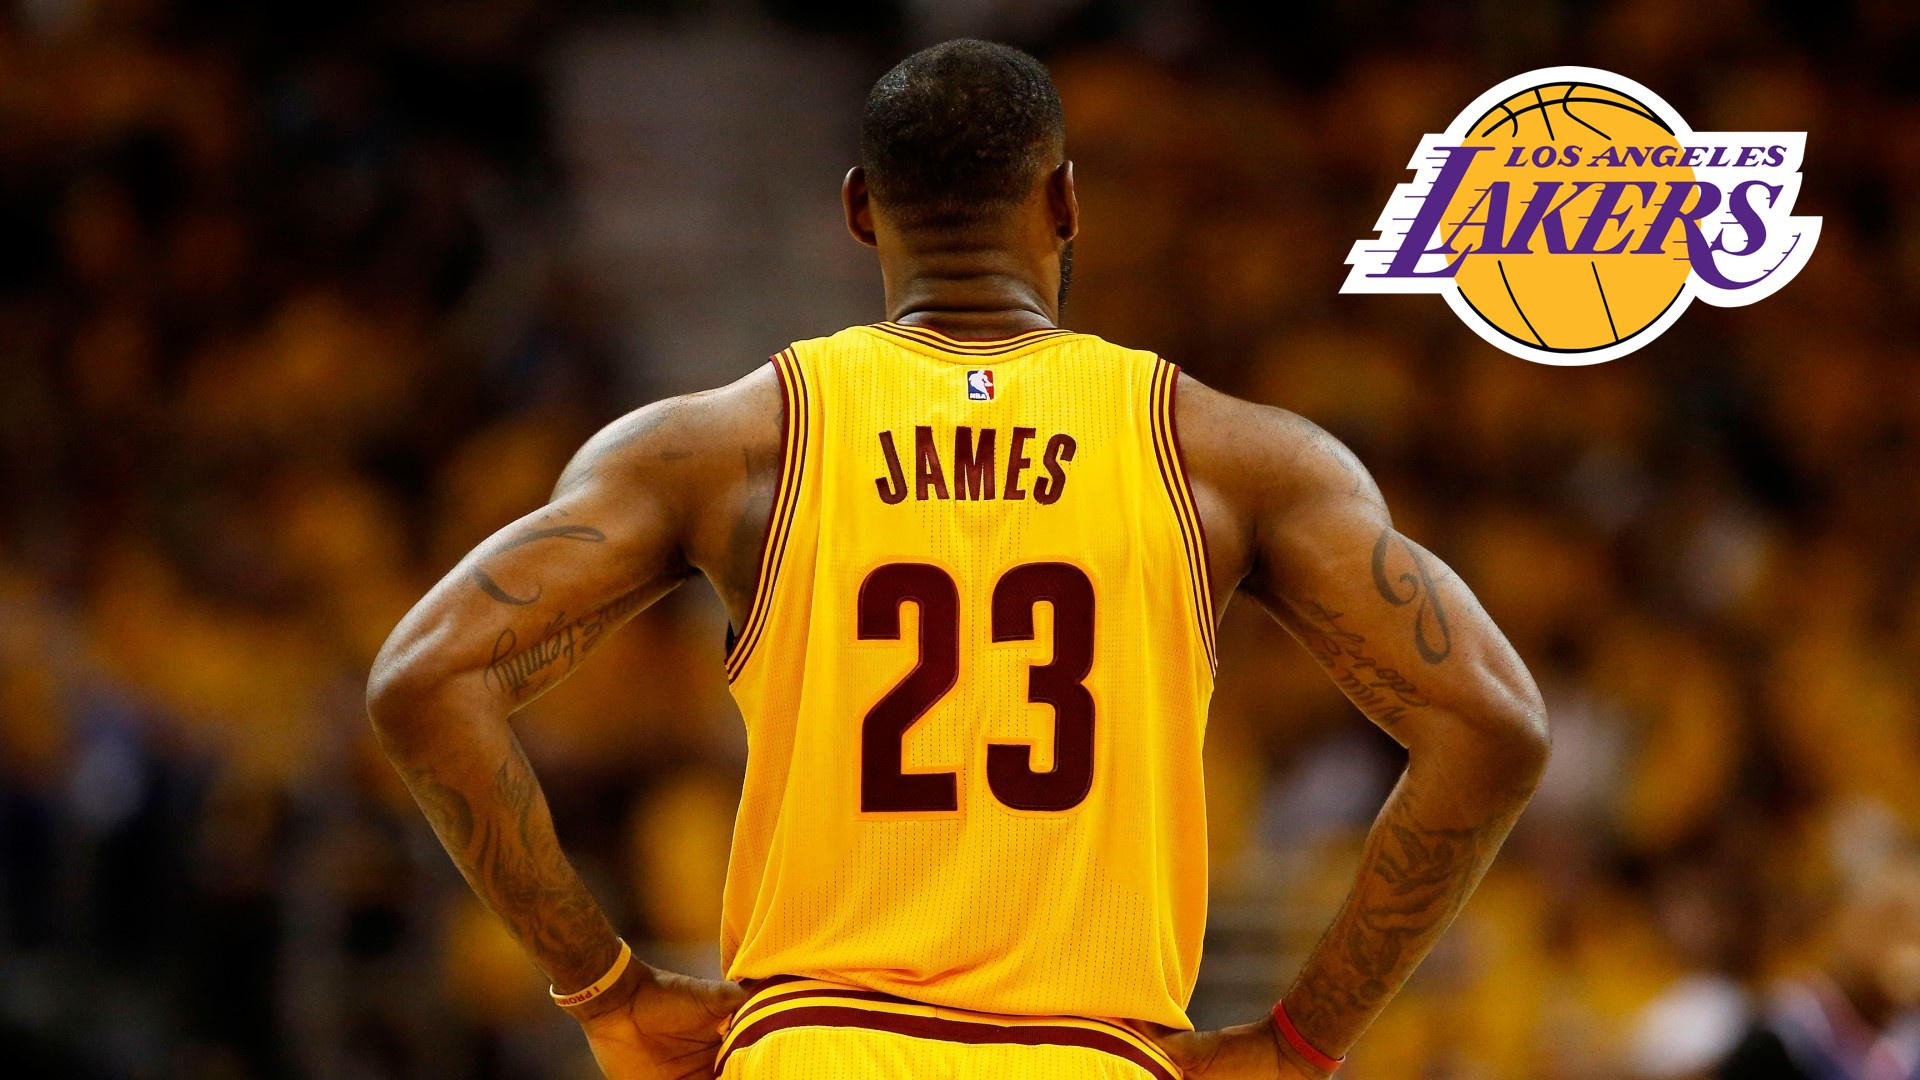 Wallpaper Desktop LeBron James Lakers HD with image dimensions 1920x1080 pixel. You can make this wallpaper for your Desktop Computer Backgrounds, Windows or Mac Screensavers, iPhone Lock screen, Tablet or Android and another Mobile Phone device